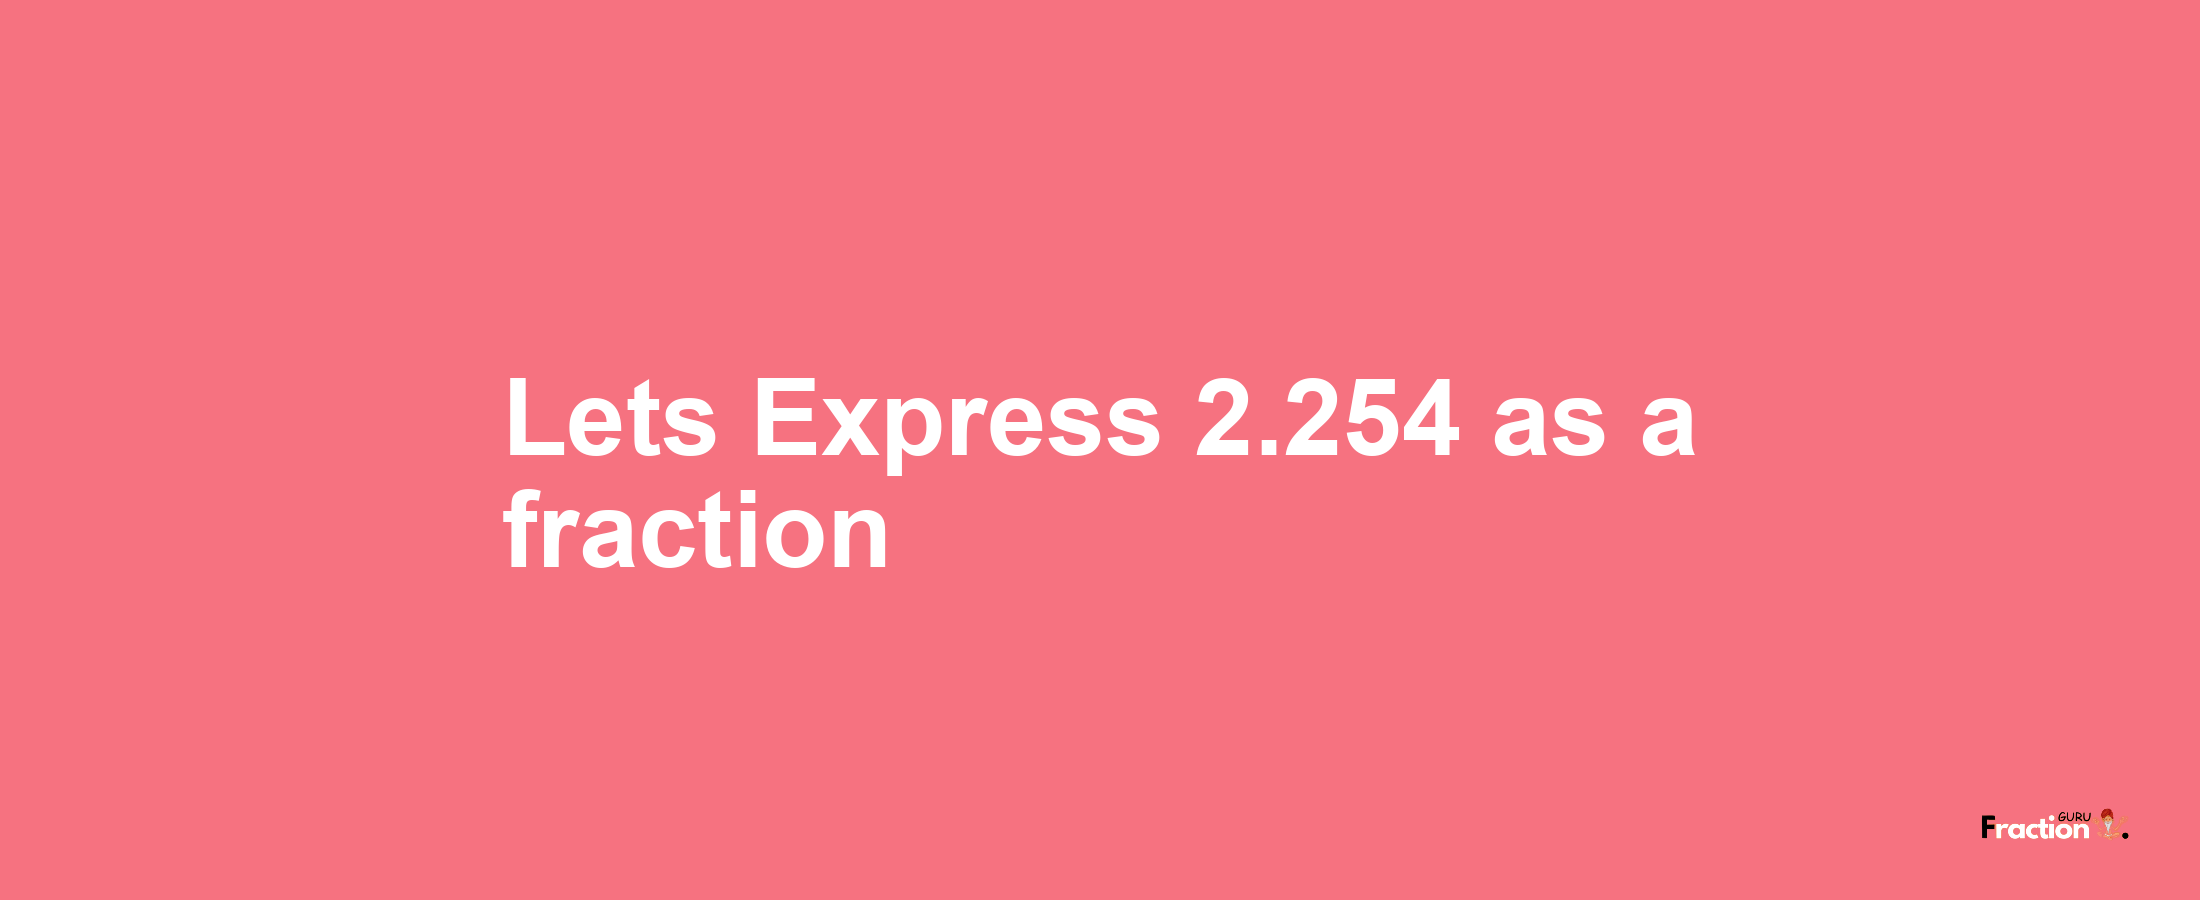 Lets Express 2.254 as afraction